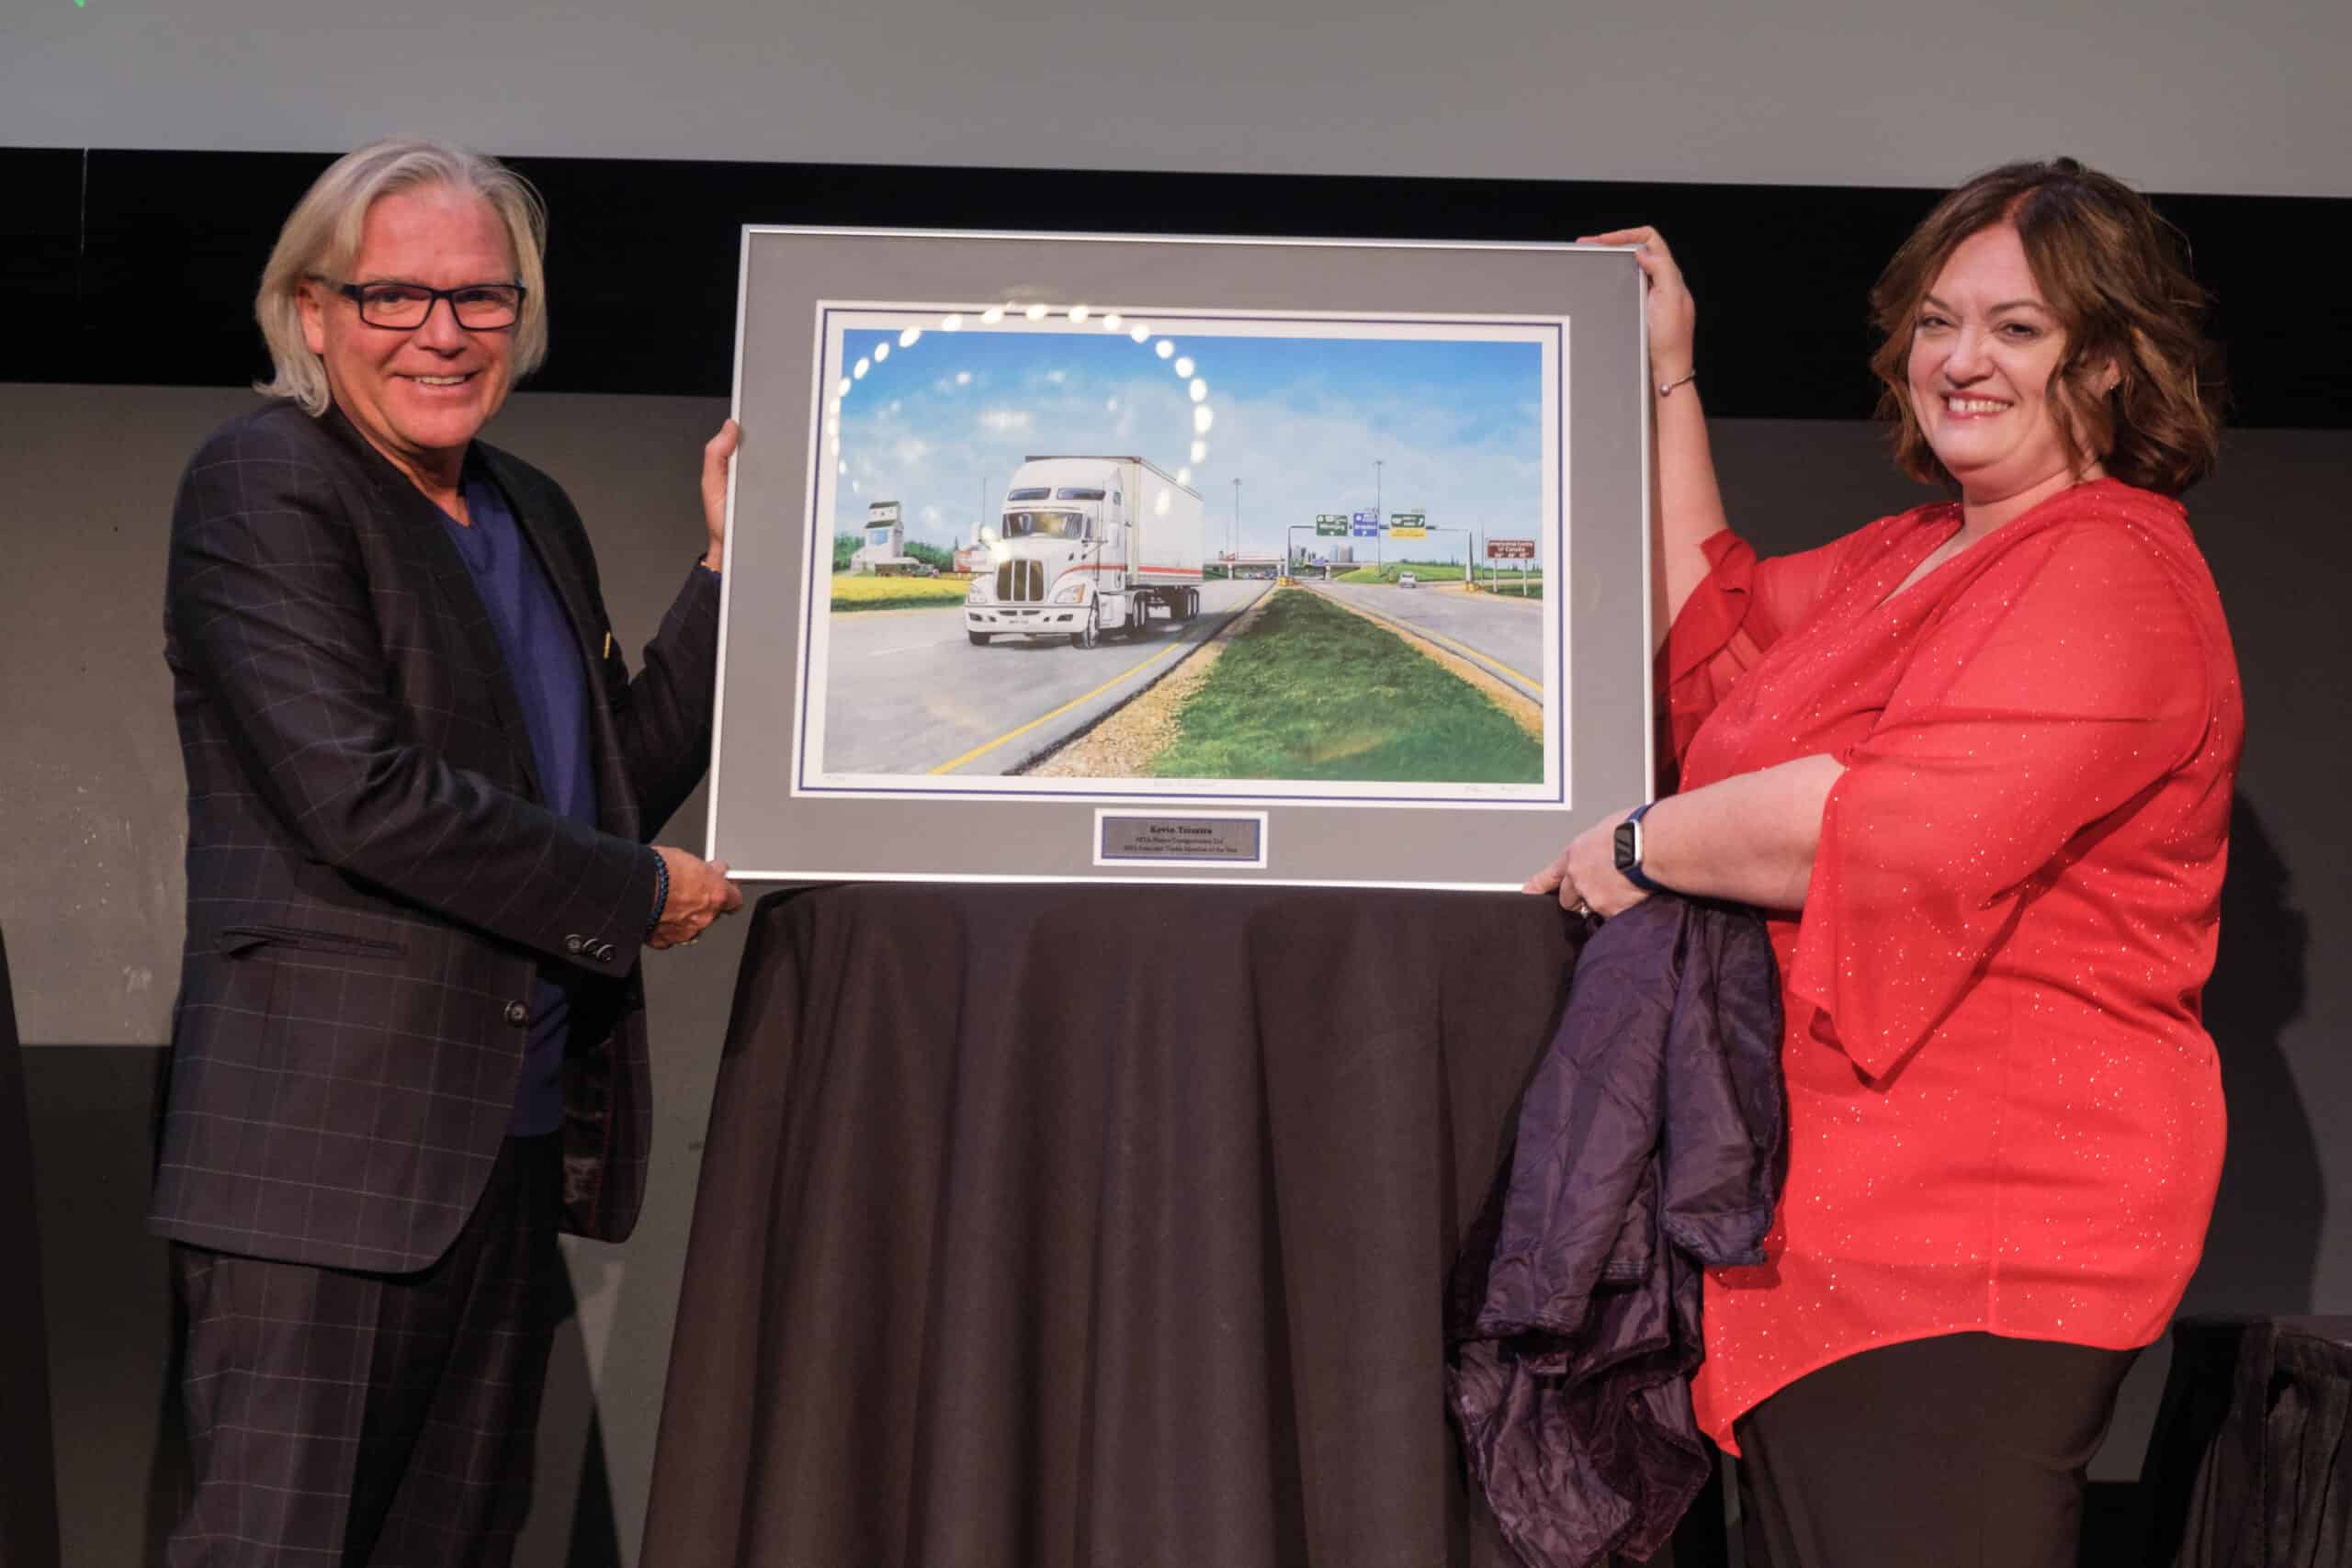 Painting of a truck on a highway being presented on stage by Kevin Teixeira and Pauline Wiebe Peters